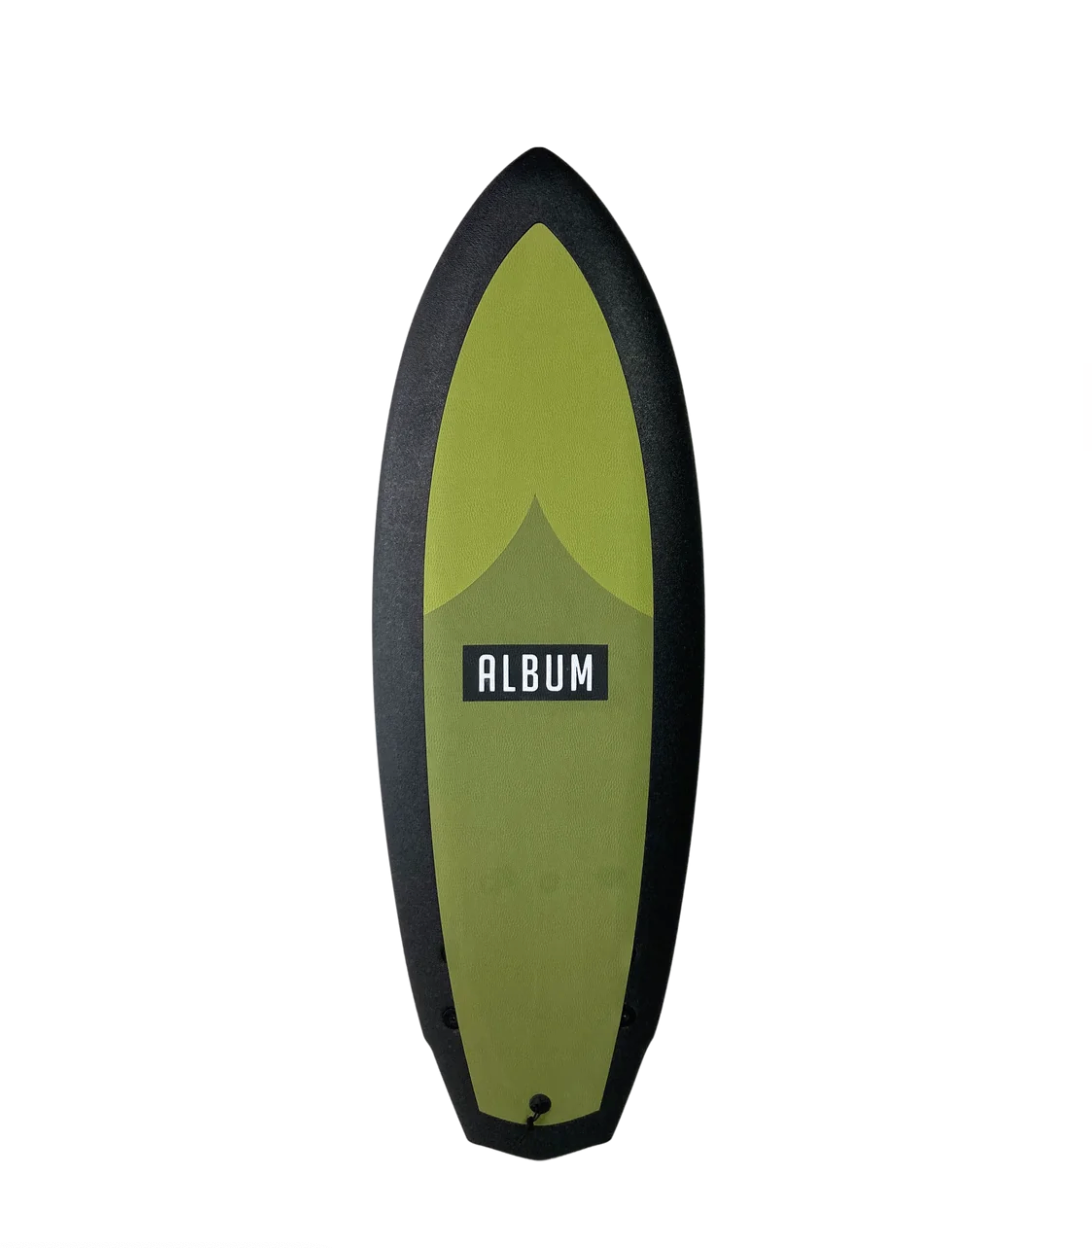 A black and green 4 foot 10 inch Album Seaskate surfboard with a logo illustration on a transparent background